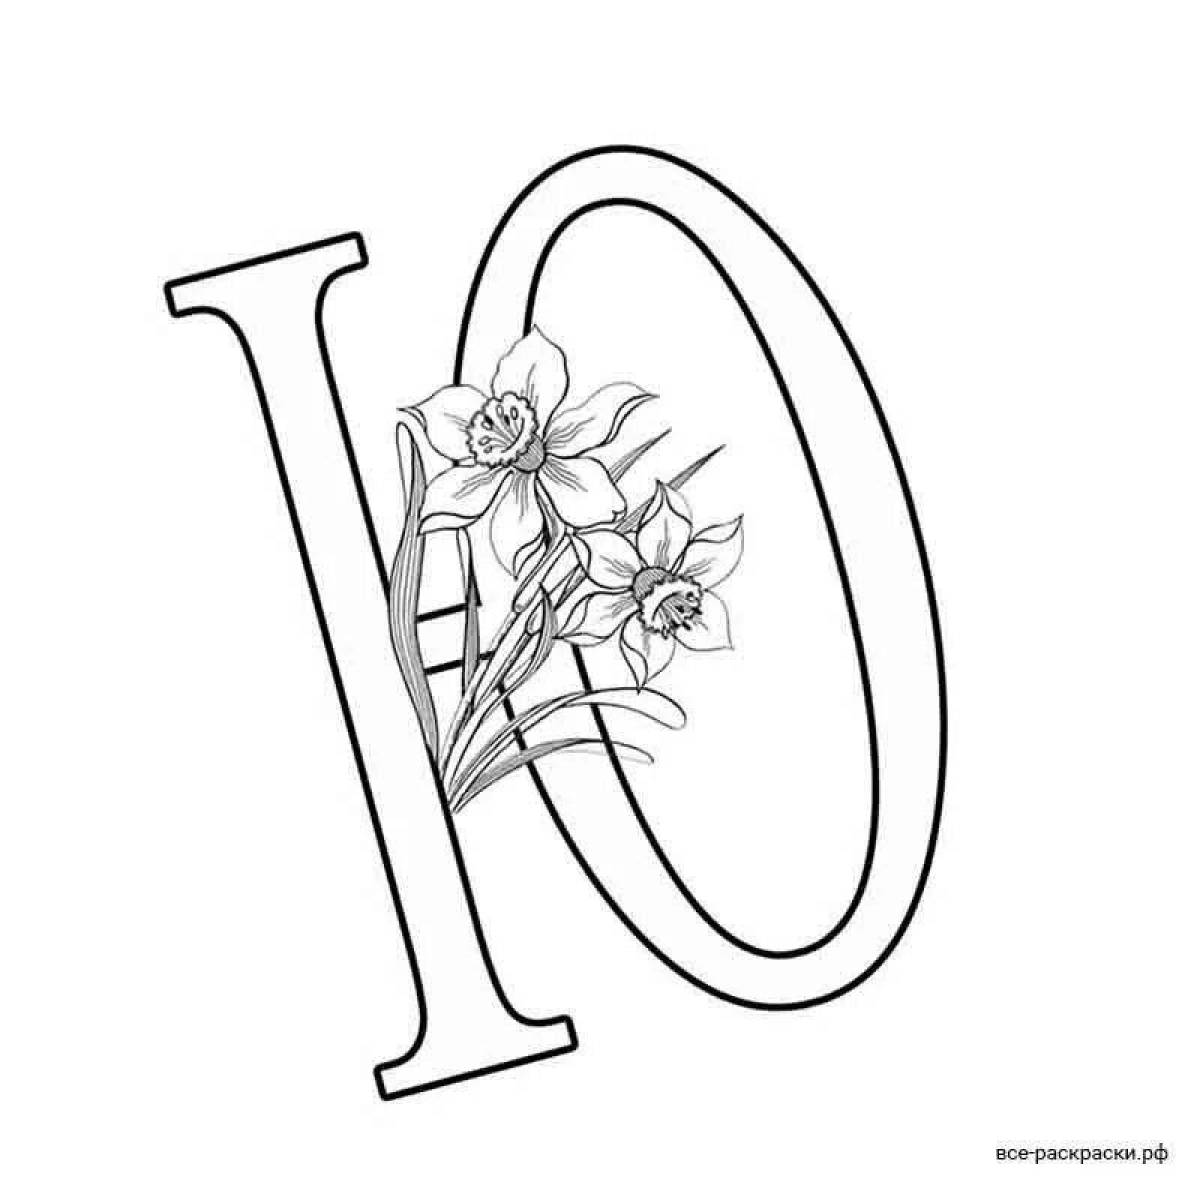 A fun coloring book with the letter u for kids